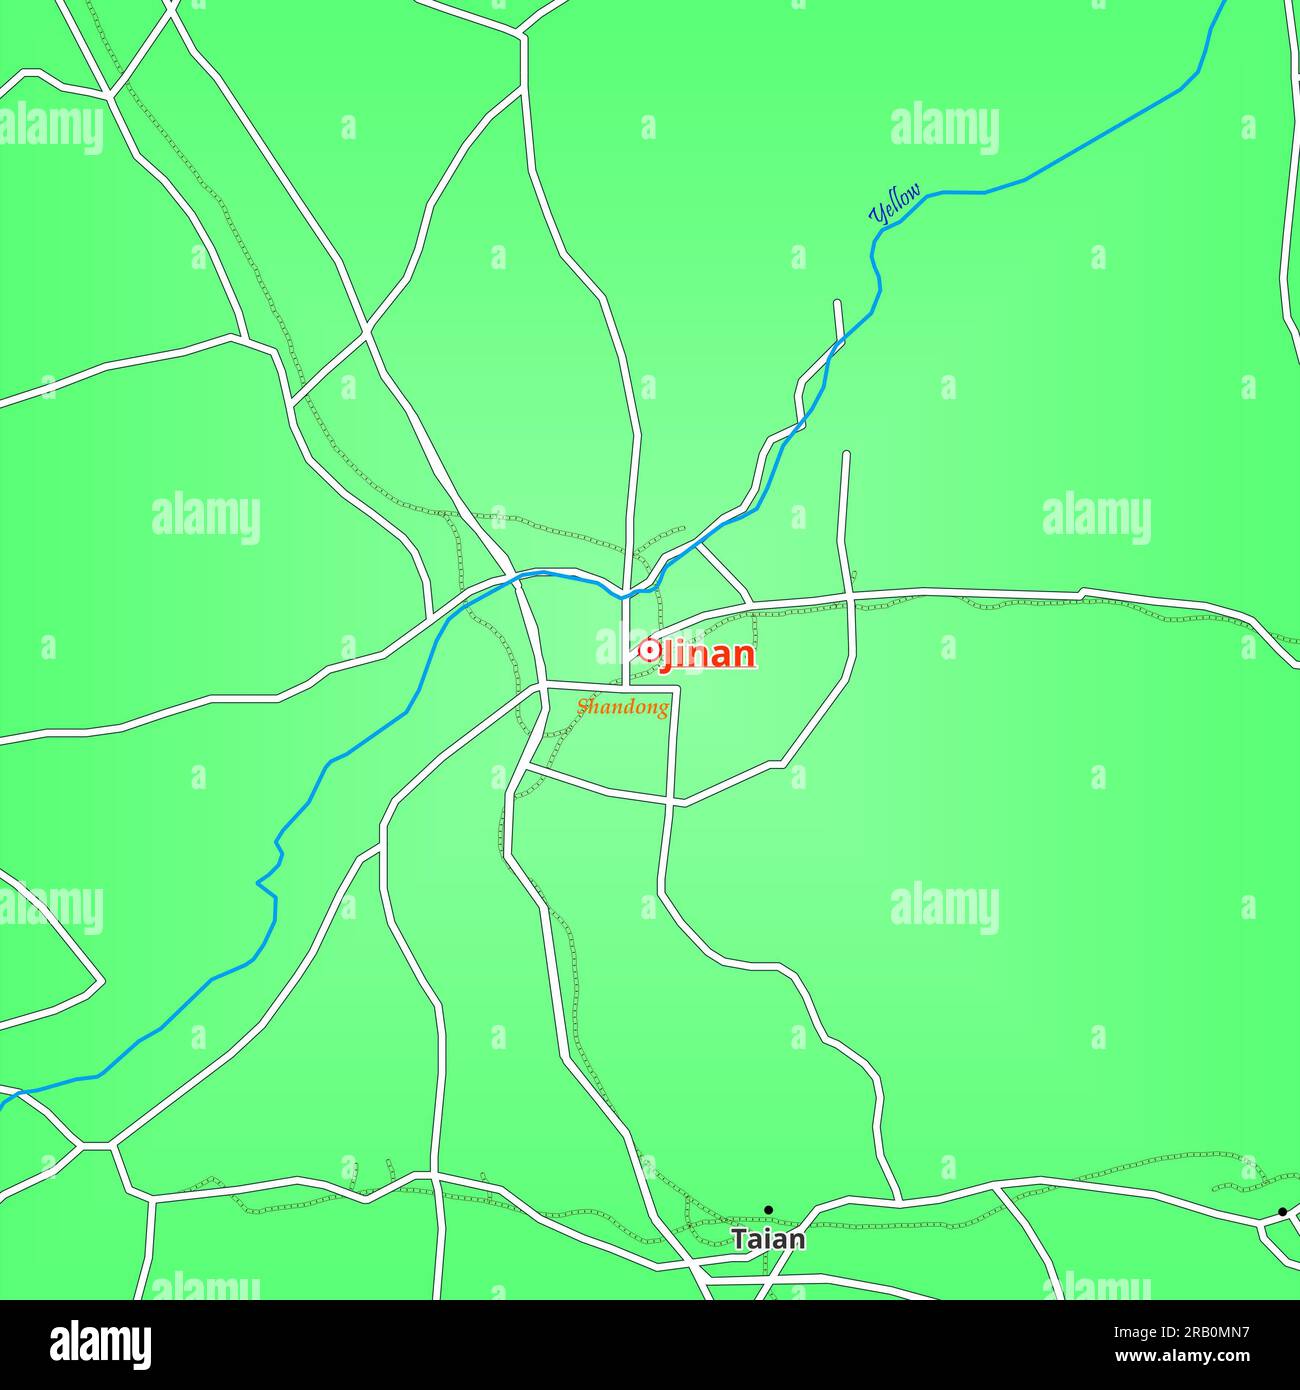 Map Of Jinan City In China 2RB0MN7 